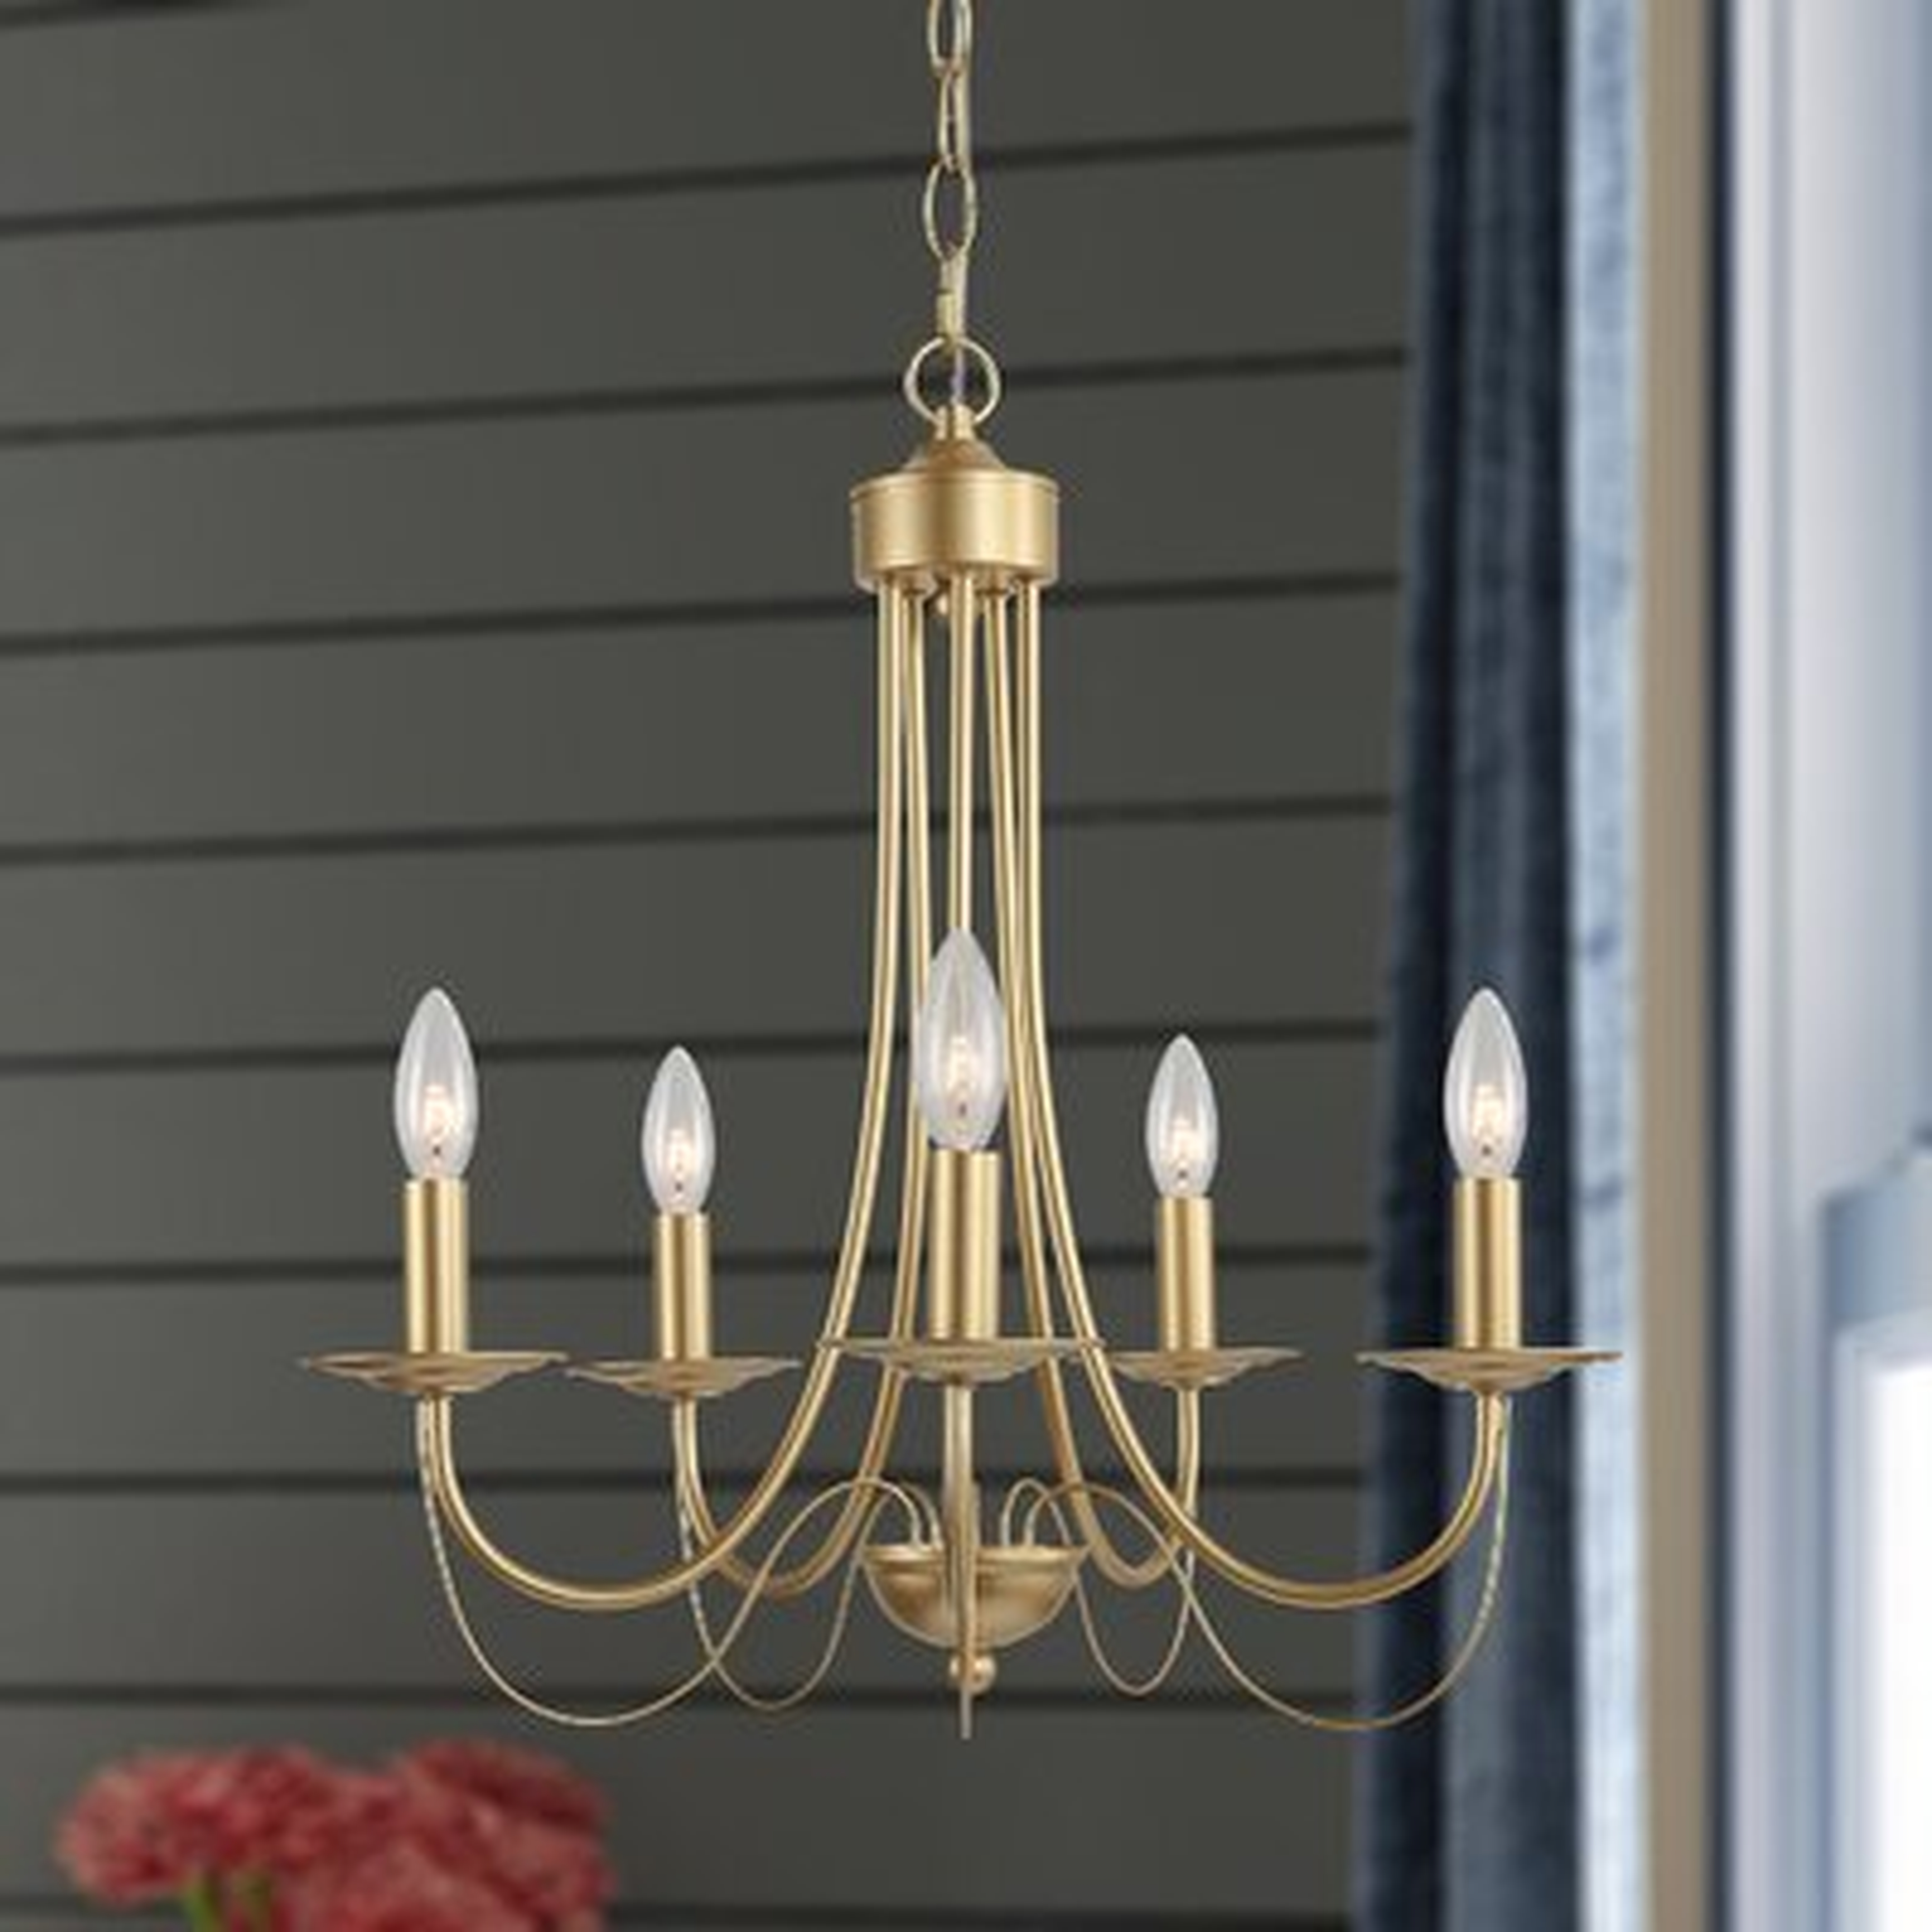 Ohanesian 5-Light Candle Style Classic / Traditional Chandelier - Wayfair